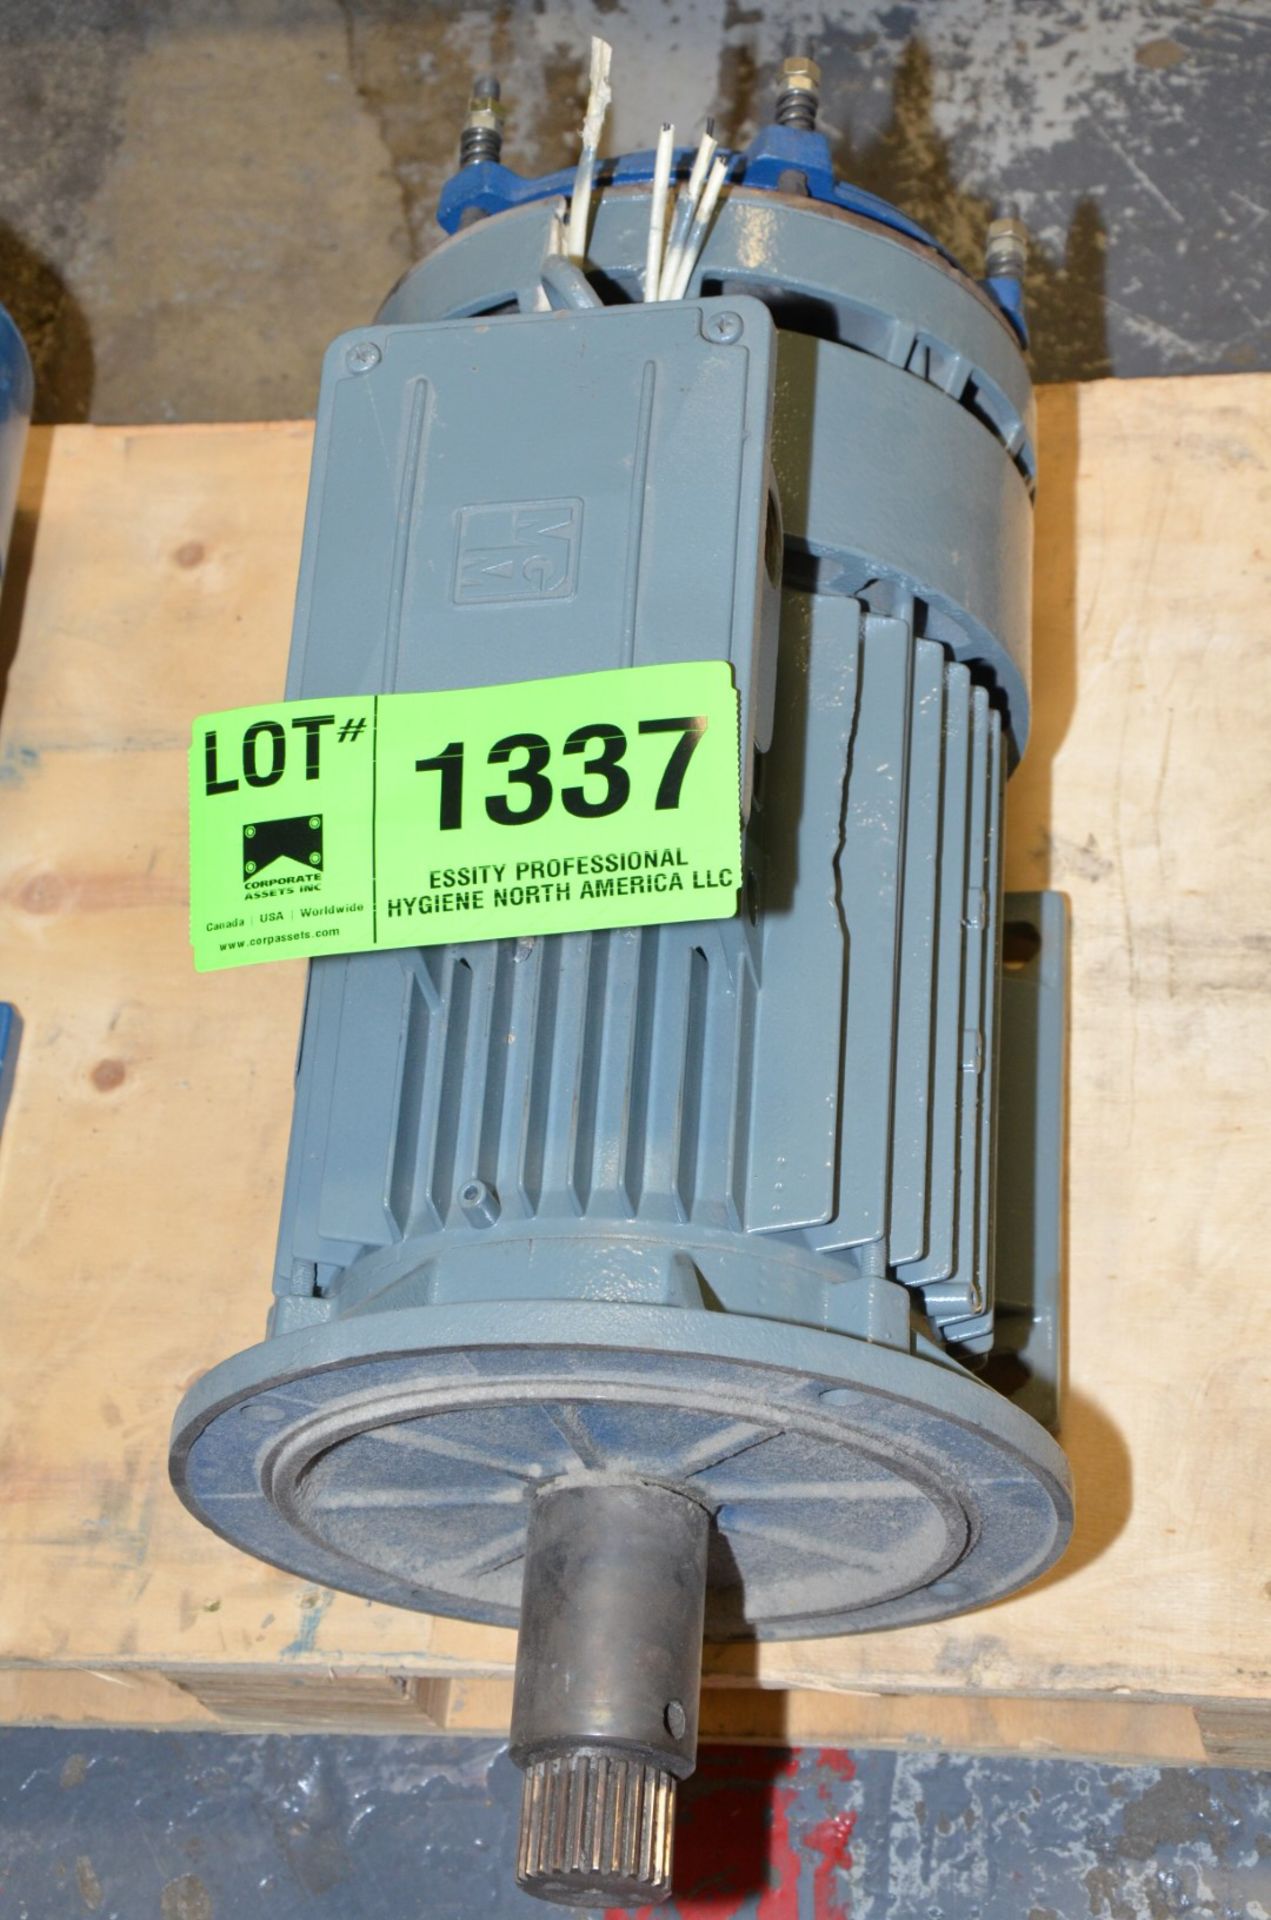 MGM 9.2 KW 1445 RPM 460V ELECTRIC MOTOR [RIGGING FEE FOR LOT #1337 - $25 USD PLUS APPLICABLE TAXES]